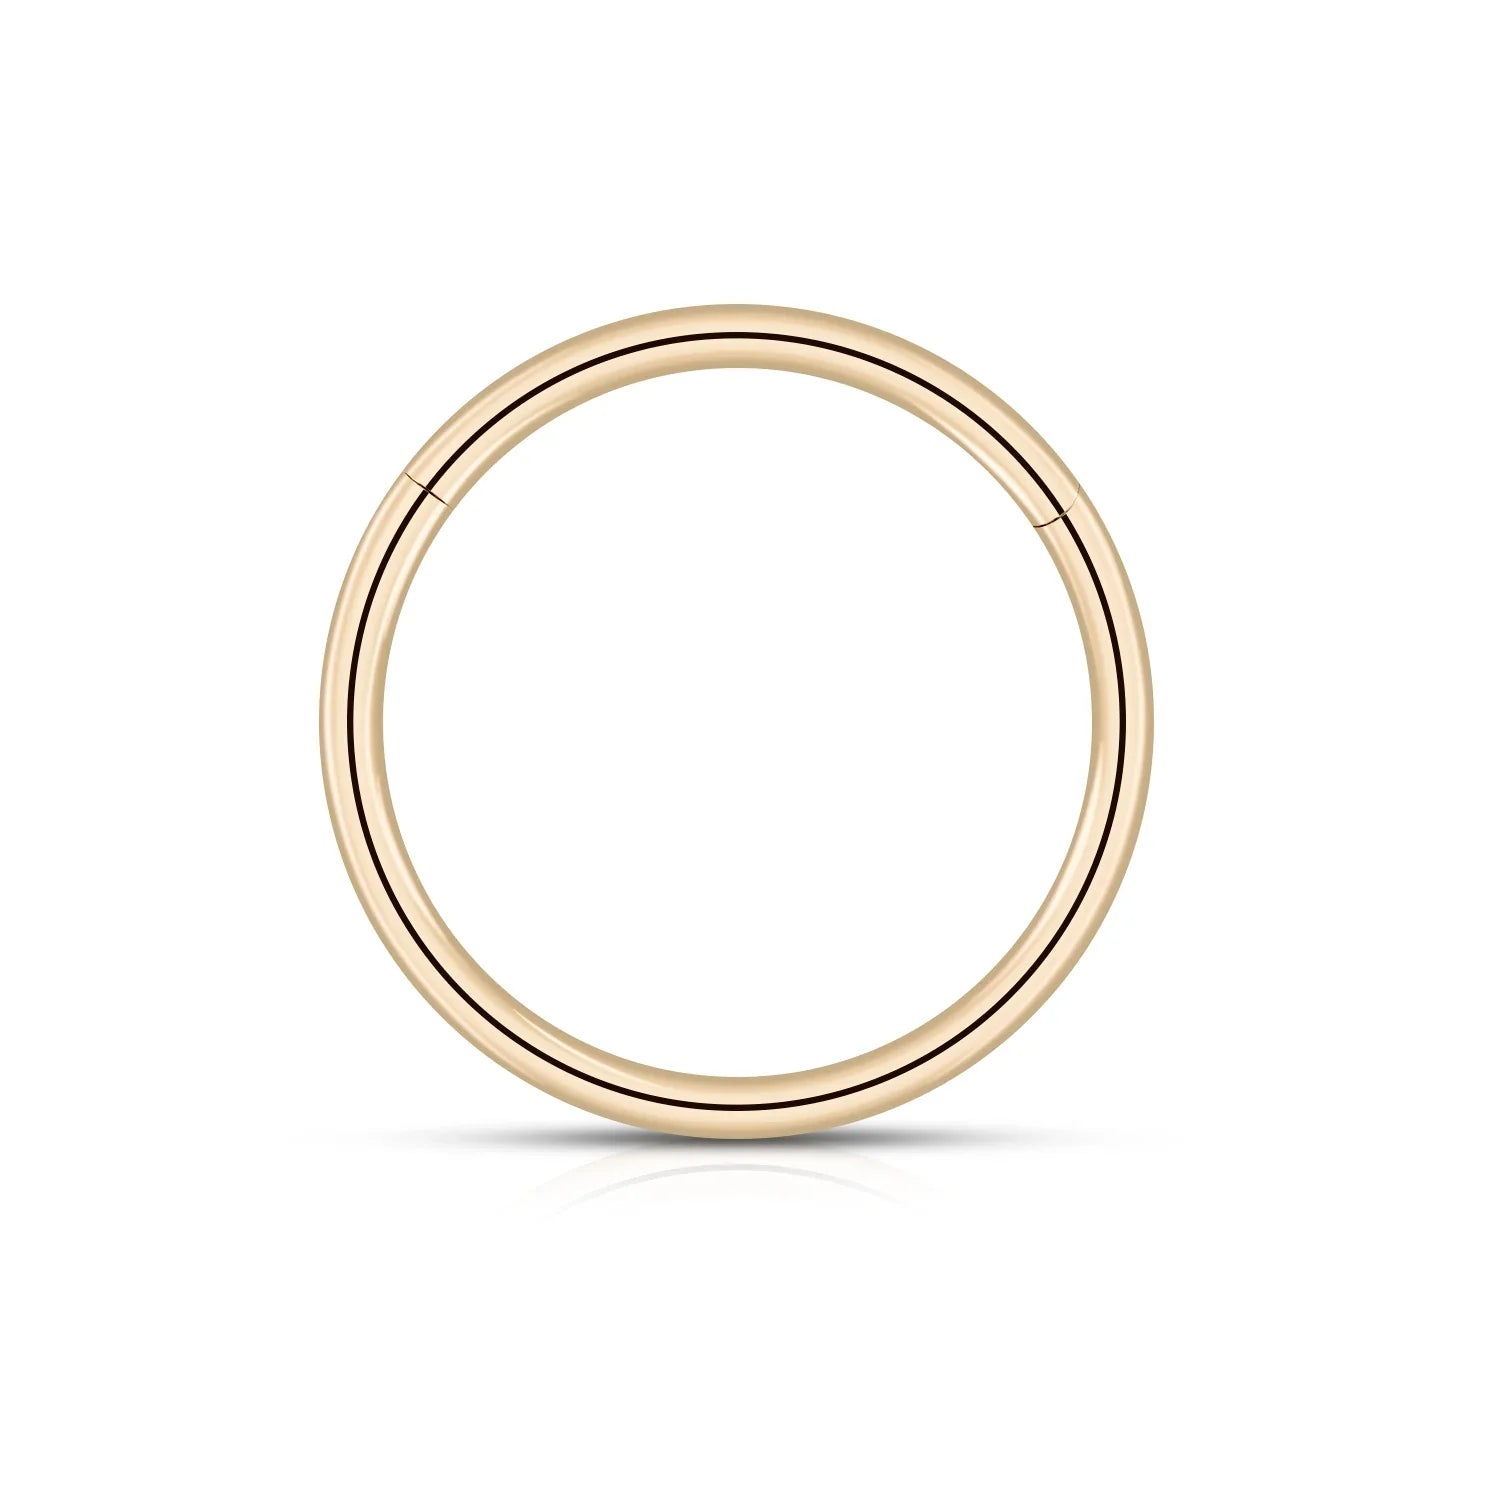 18K gold nose ring nose clicker ring solid gold septum ring lip ring ear piercing 16G 18G 20G Ashley Piercing Jewelry